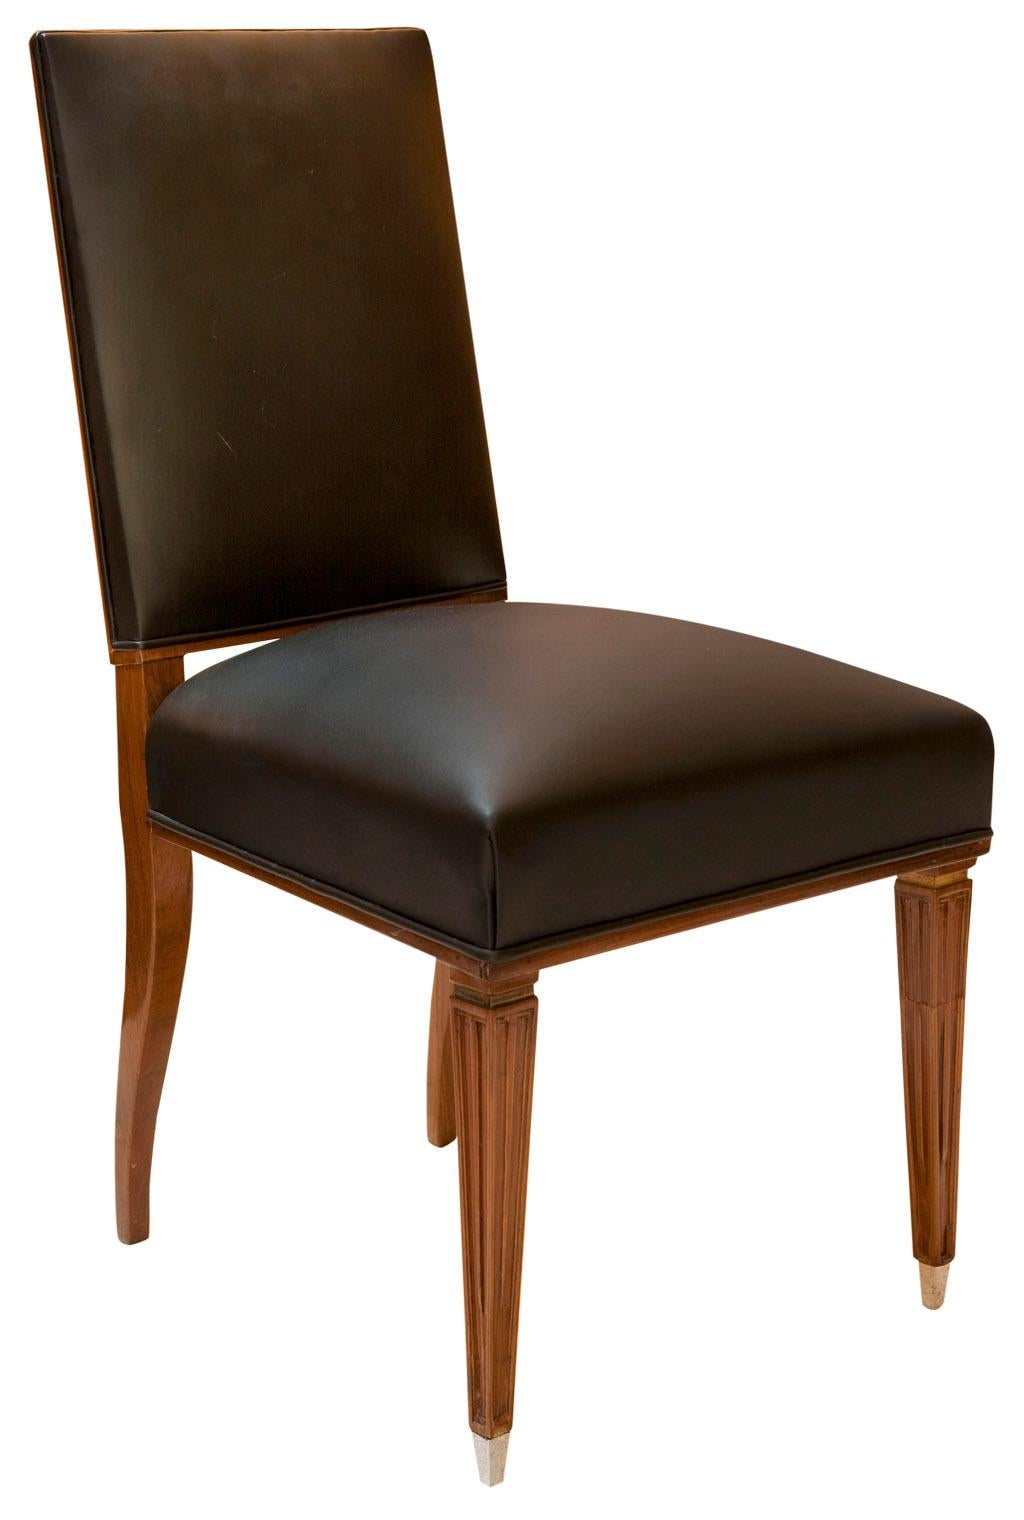 Luxury 12 Art Deco chairs in leather and wood.

Year 1930
Country: French
Materials : wood, chrome and leather
Finish: polyurethanic lacquer
Elegant and sophisticated 12 chairs.
You want to live in the golden years, these are the chairs your project